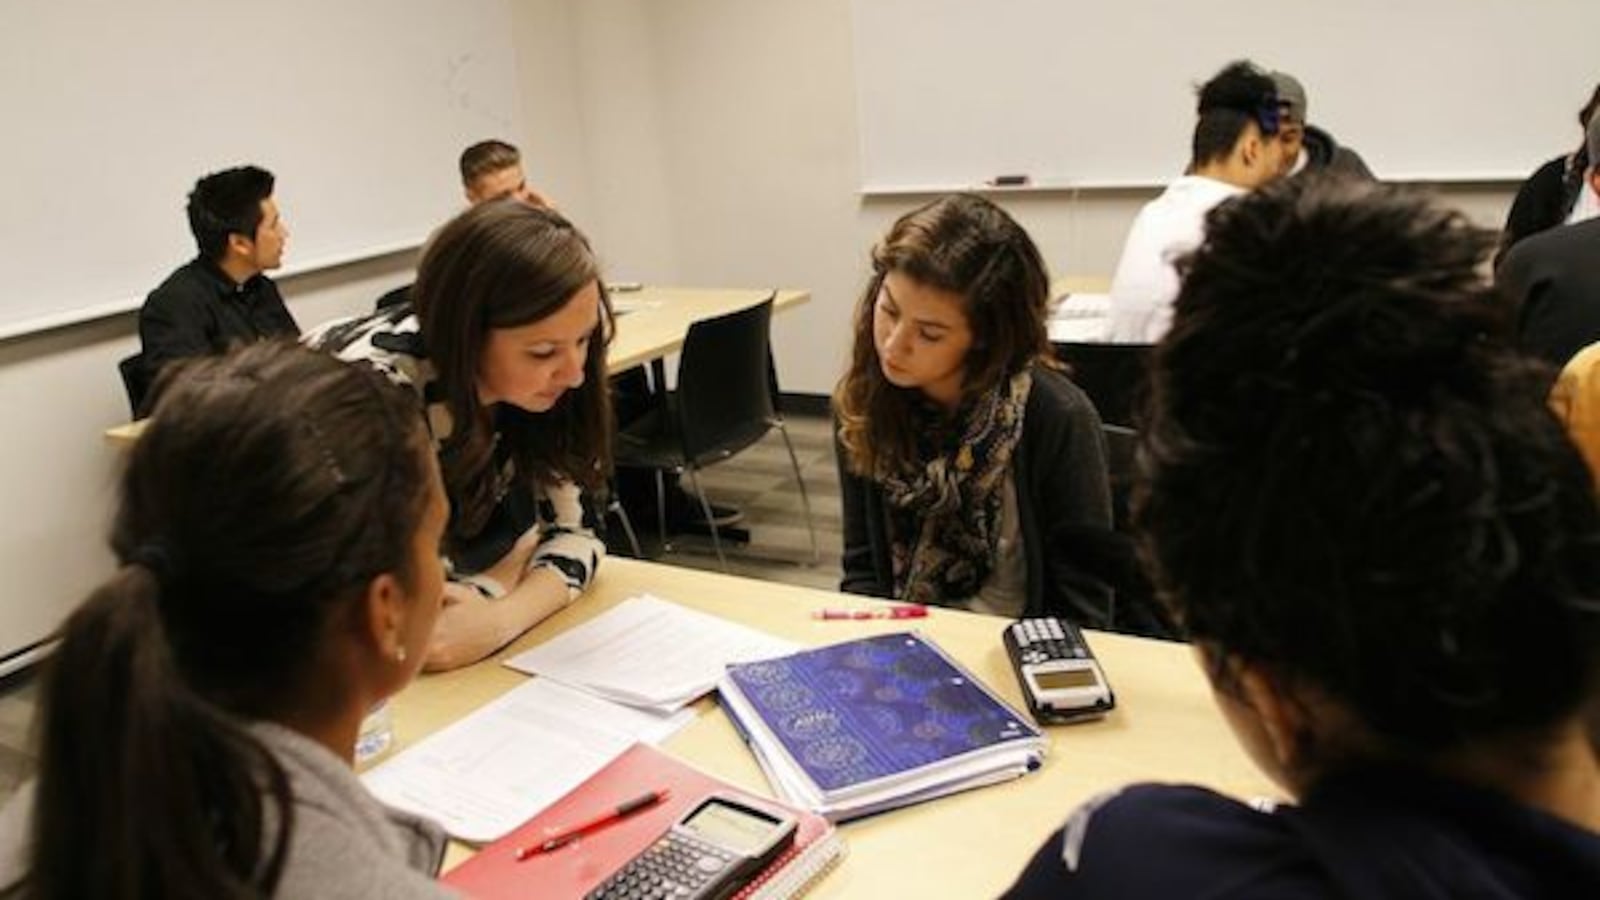 Kellie Zolnikov (left) and Kaitling Carrasco (right) discuss a math problem in peer study session. Zolnikov helps manage Metro State's SAI program.